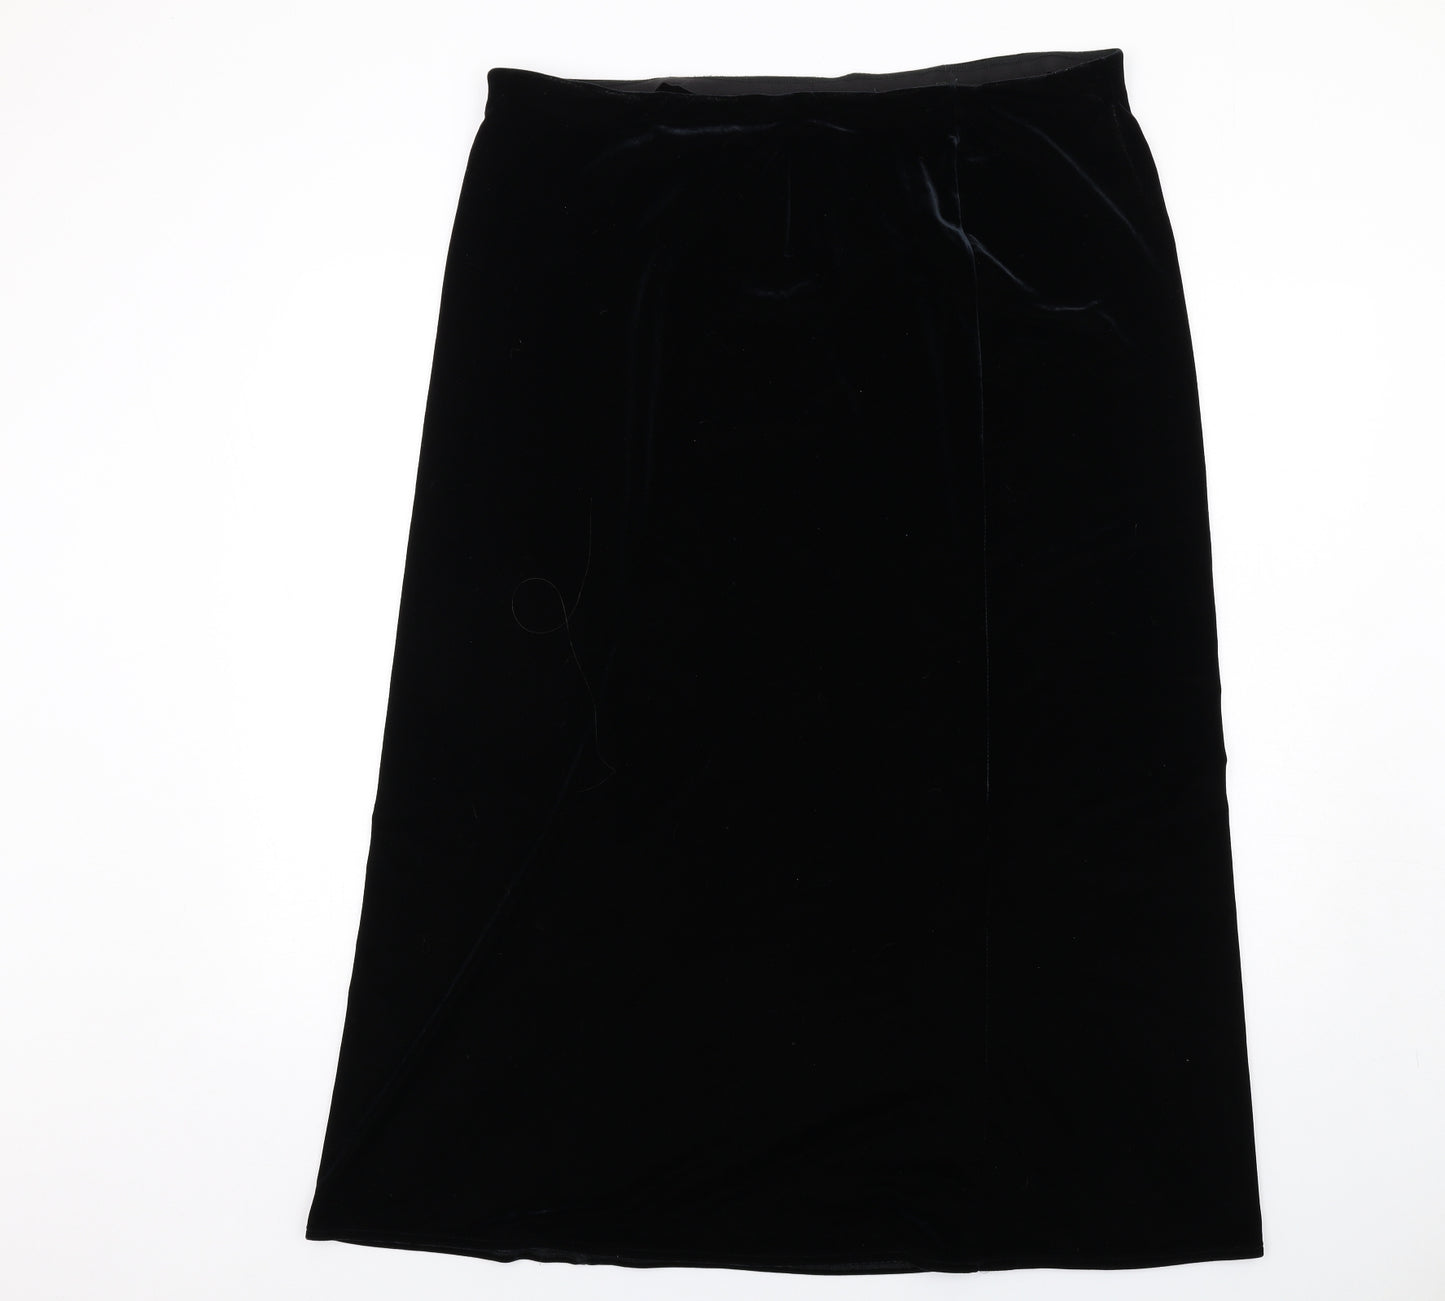 Marks and Spencer Womens Black Polyester A-Line Skirt Size 20